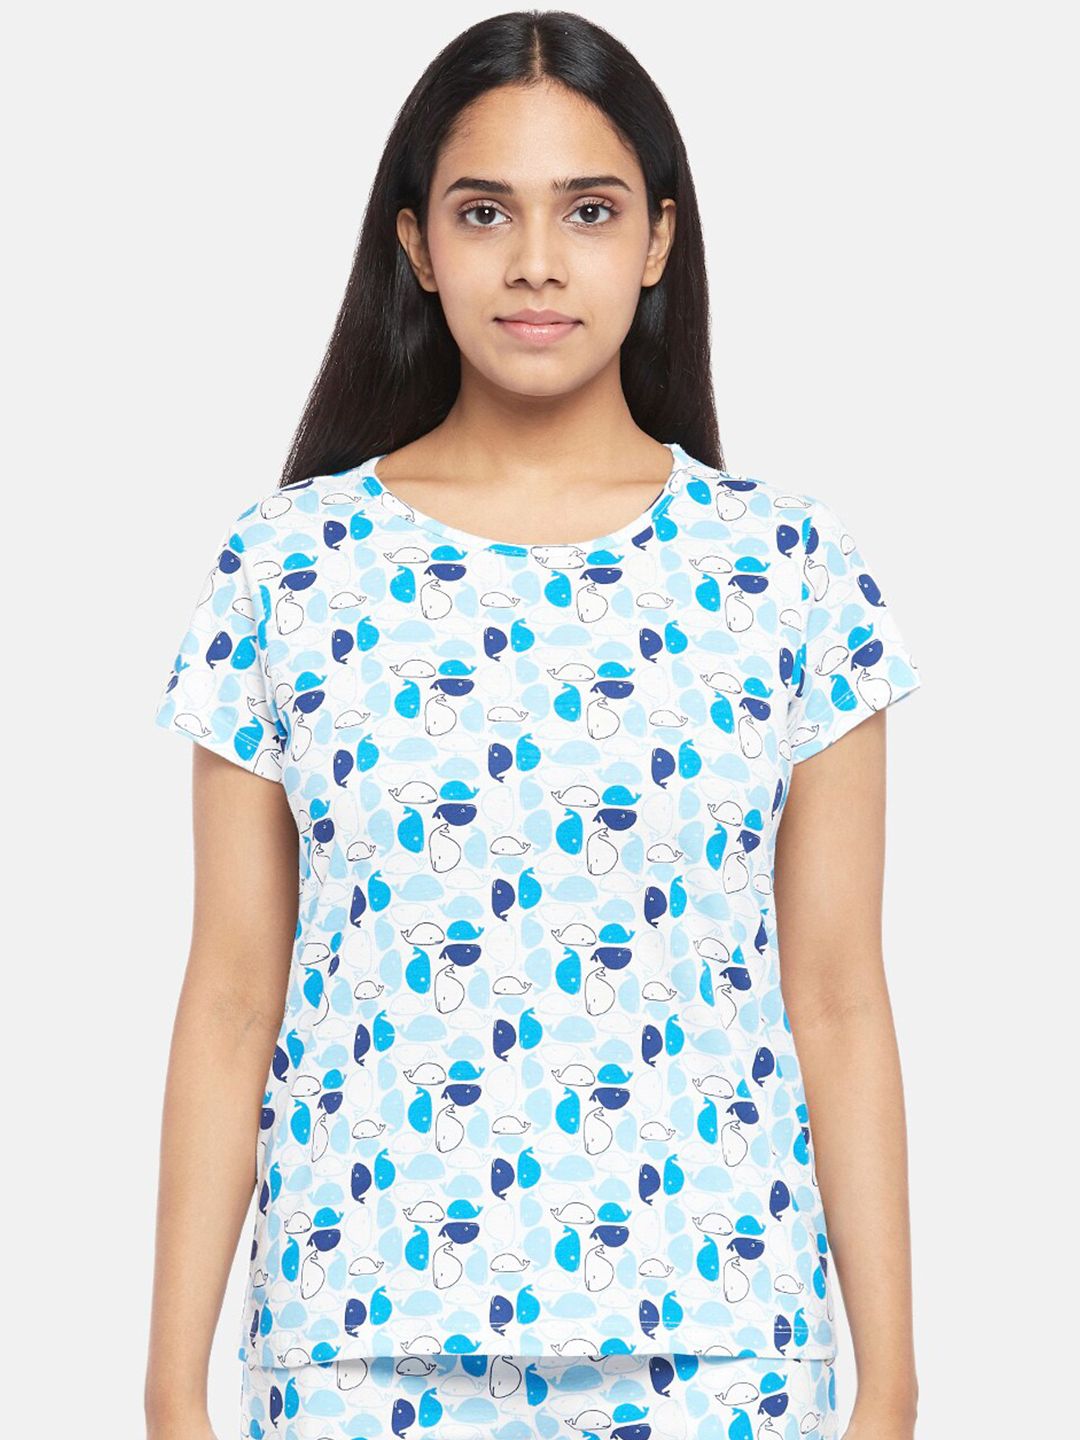 Dreamz by Pantaloons White Printed Lounge T-shirts Price in India